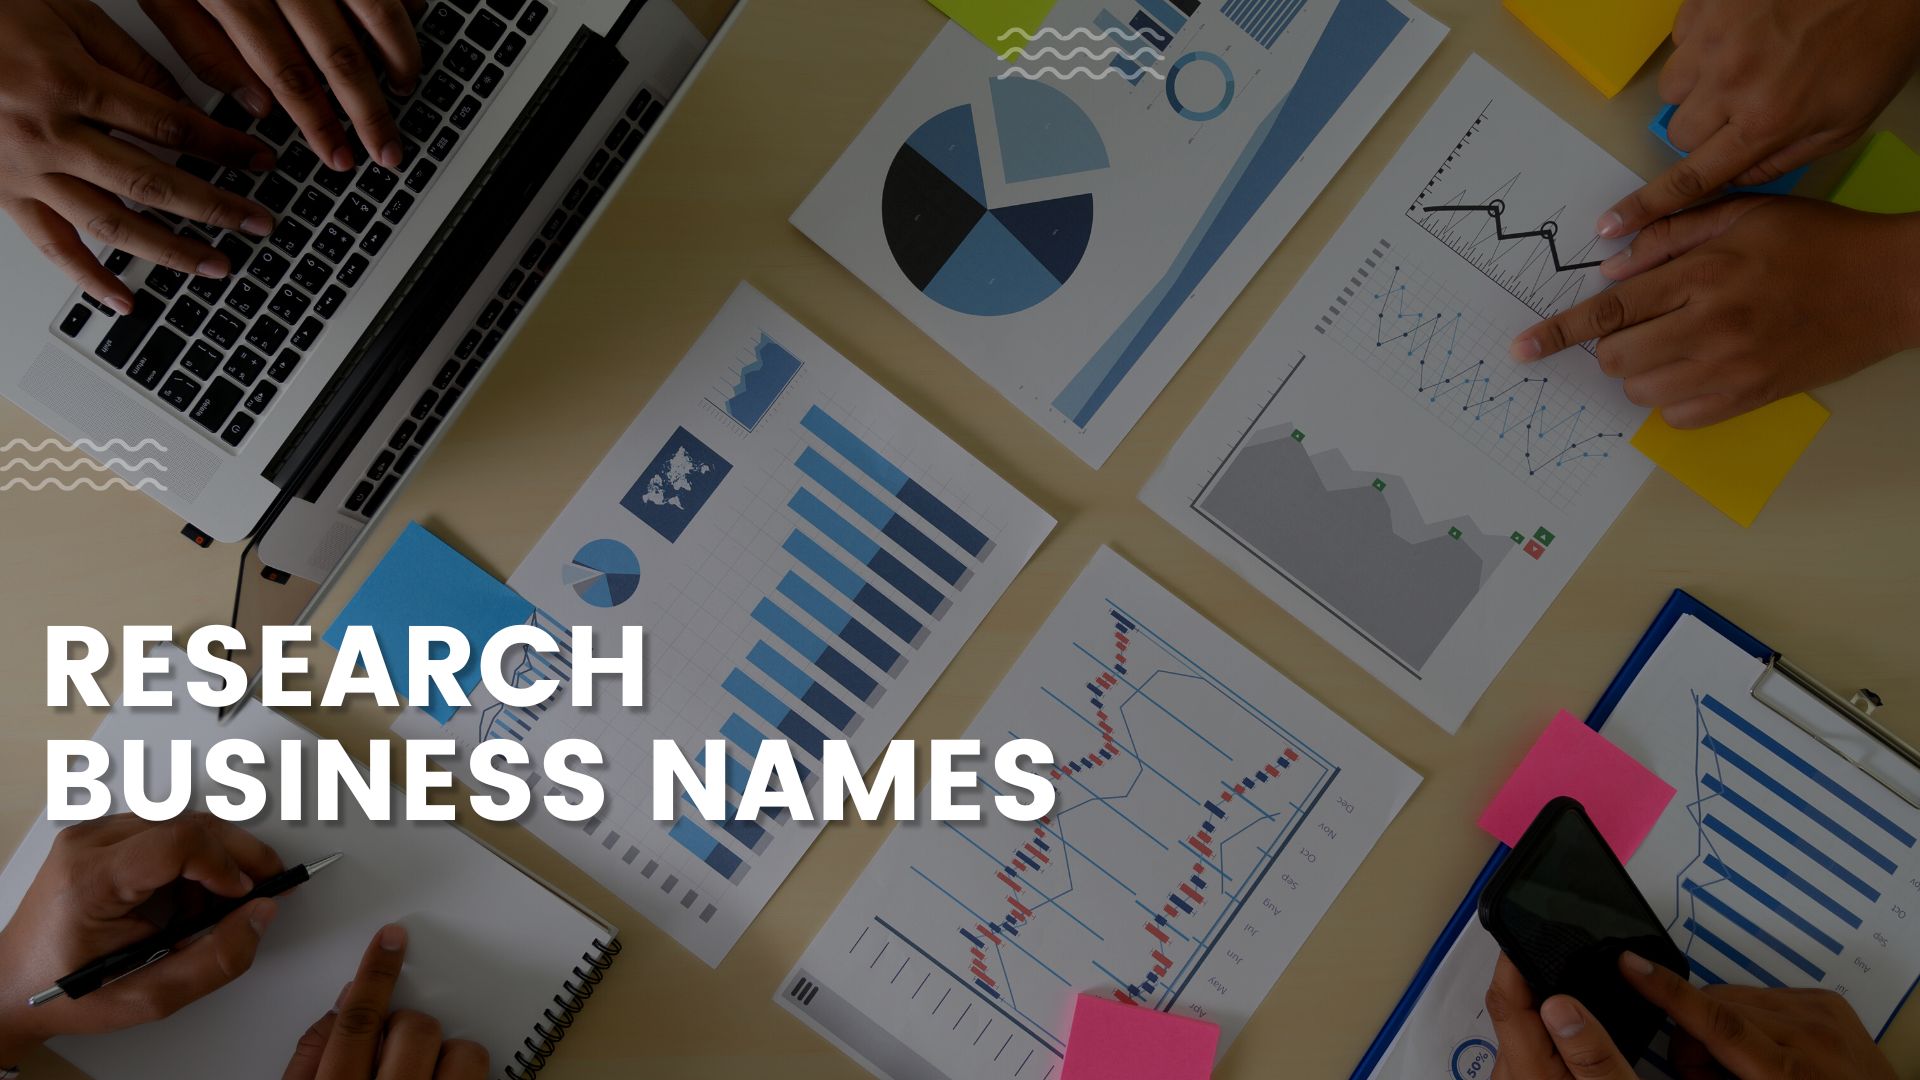 Research Business Names